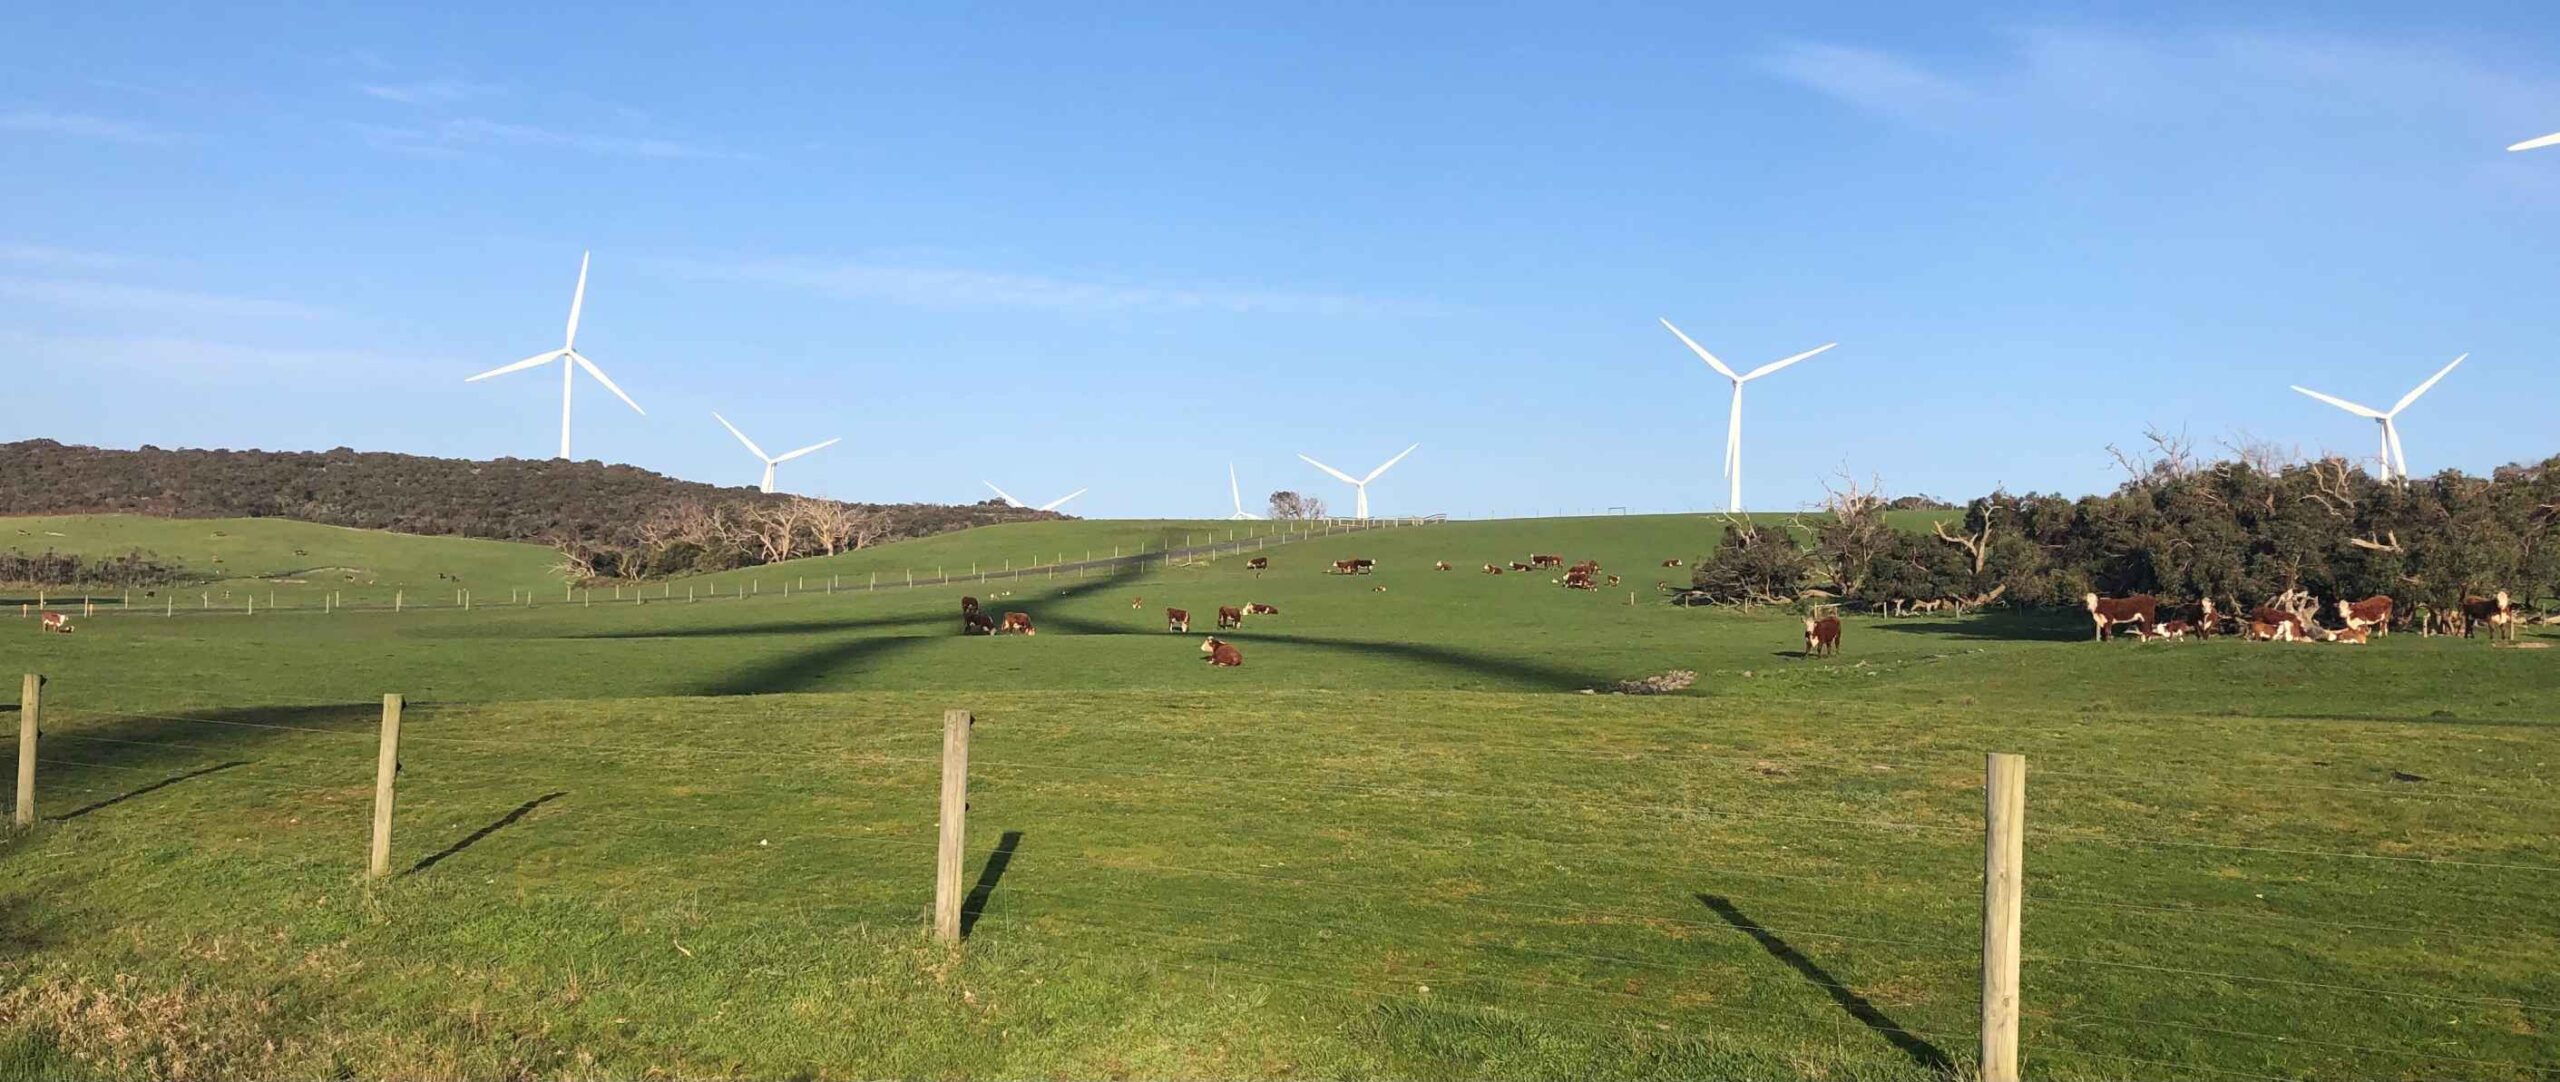 Turbines with shadows falling across a paddock in South Gippsland